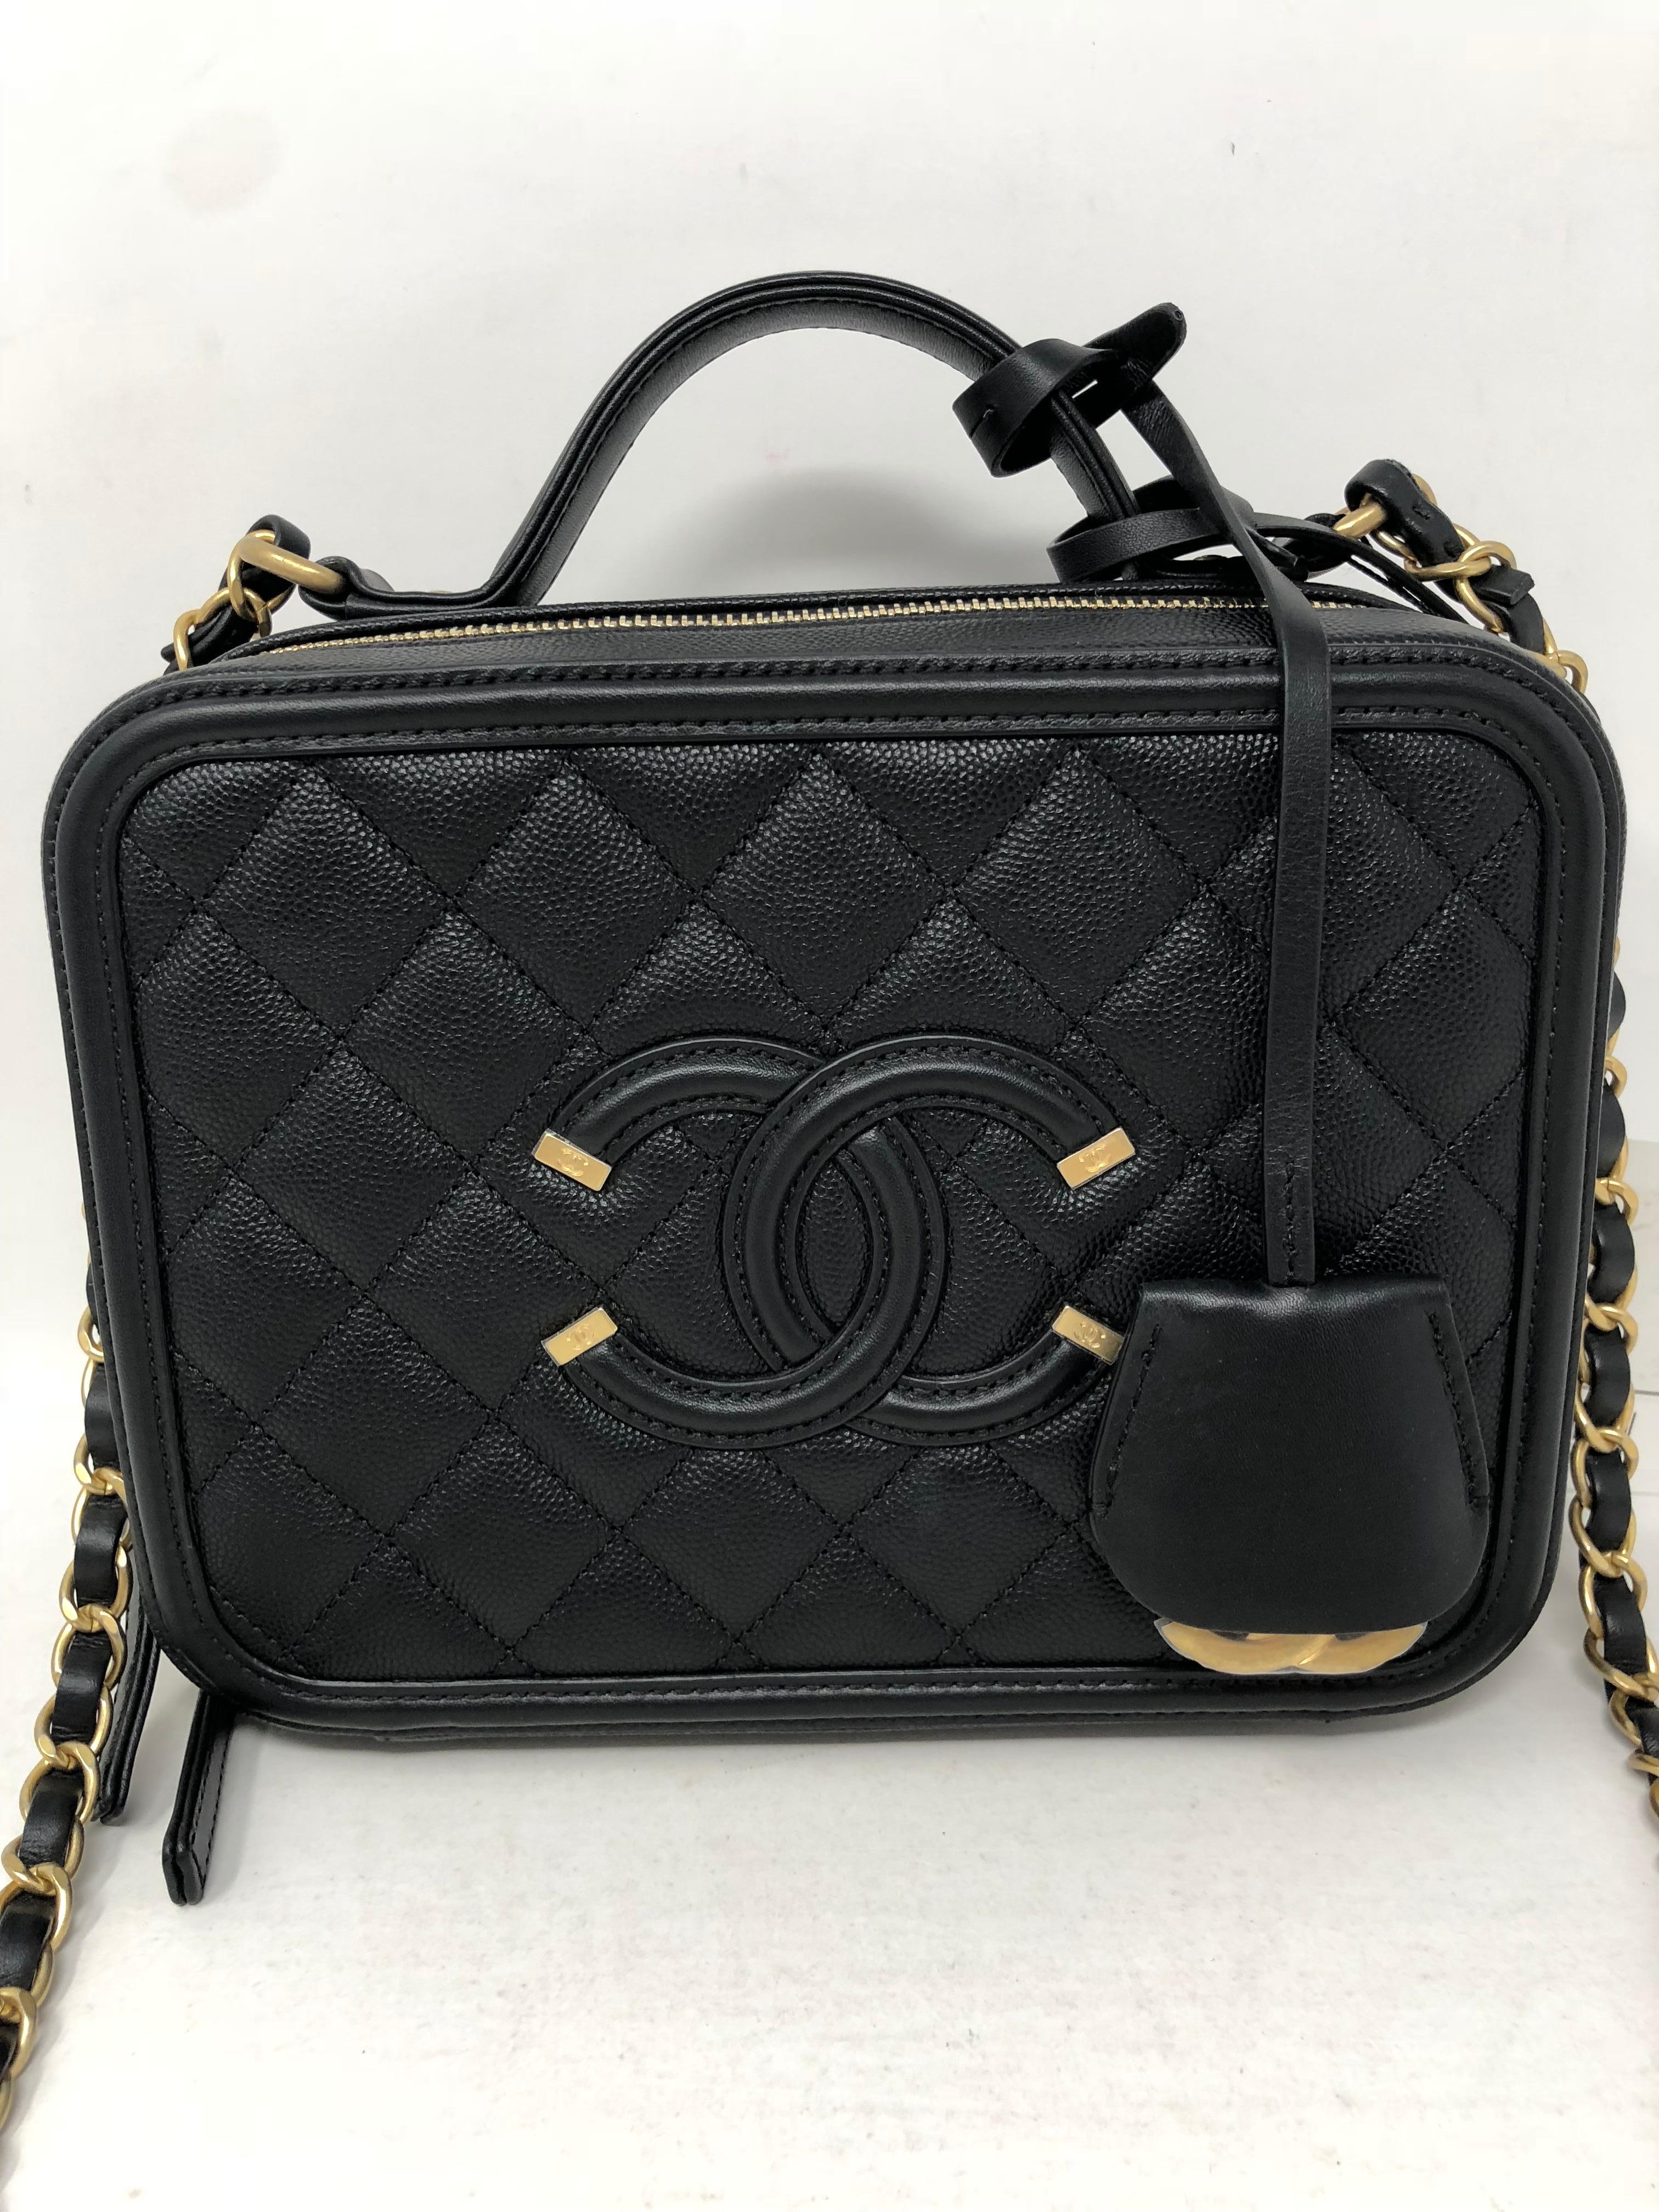 Chanel Vanity Case Bag. Brand new with original tag. The most sought after Chanel bag in black caviar leather. Comes with dust cover and box. Can be worn as a shoulder bag or carried from the short handle. Guaranteed authentic. 